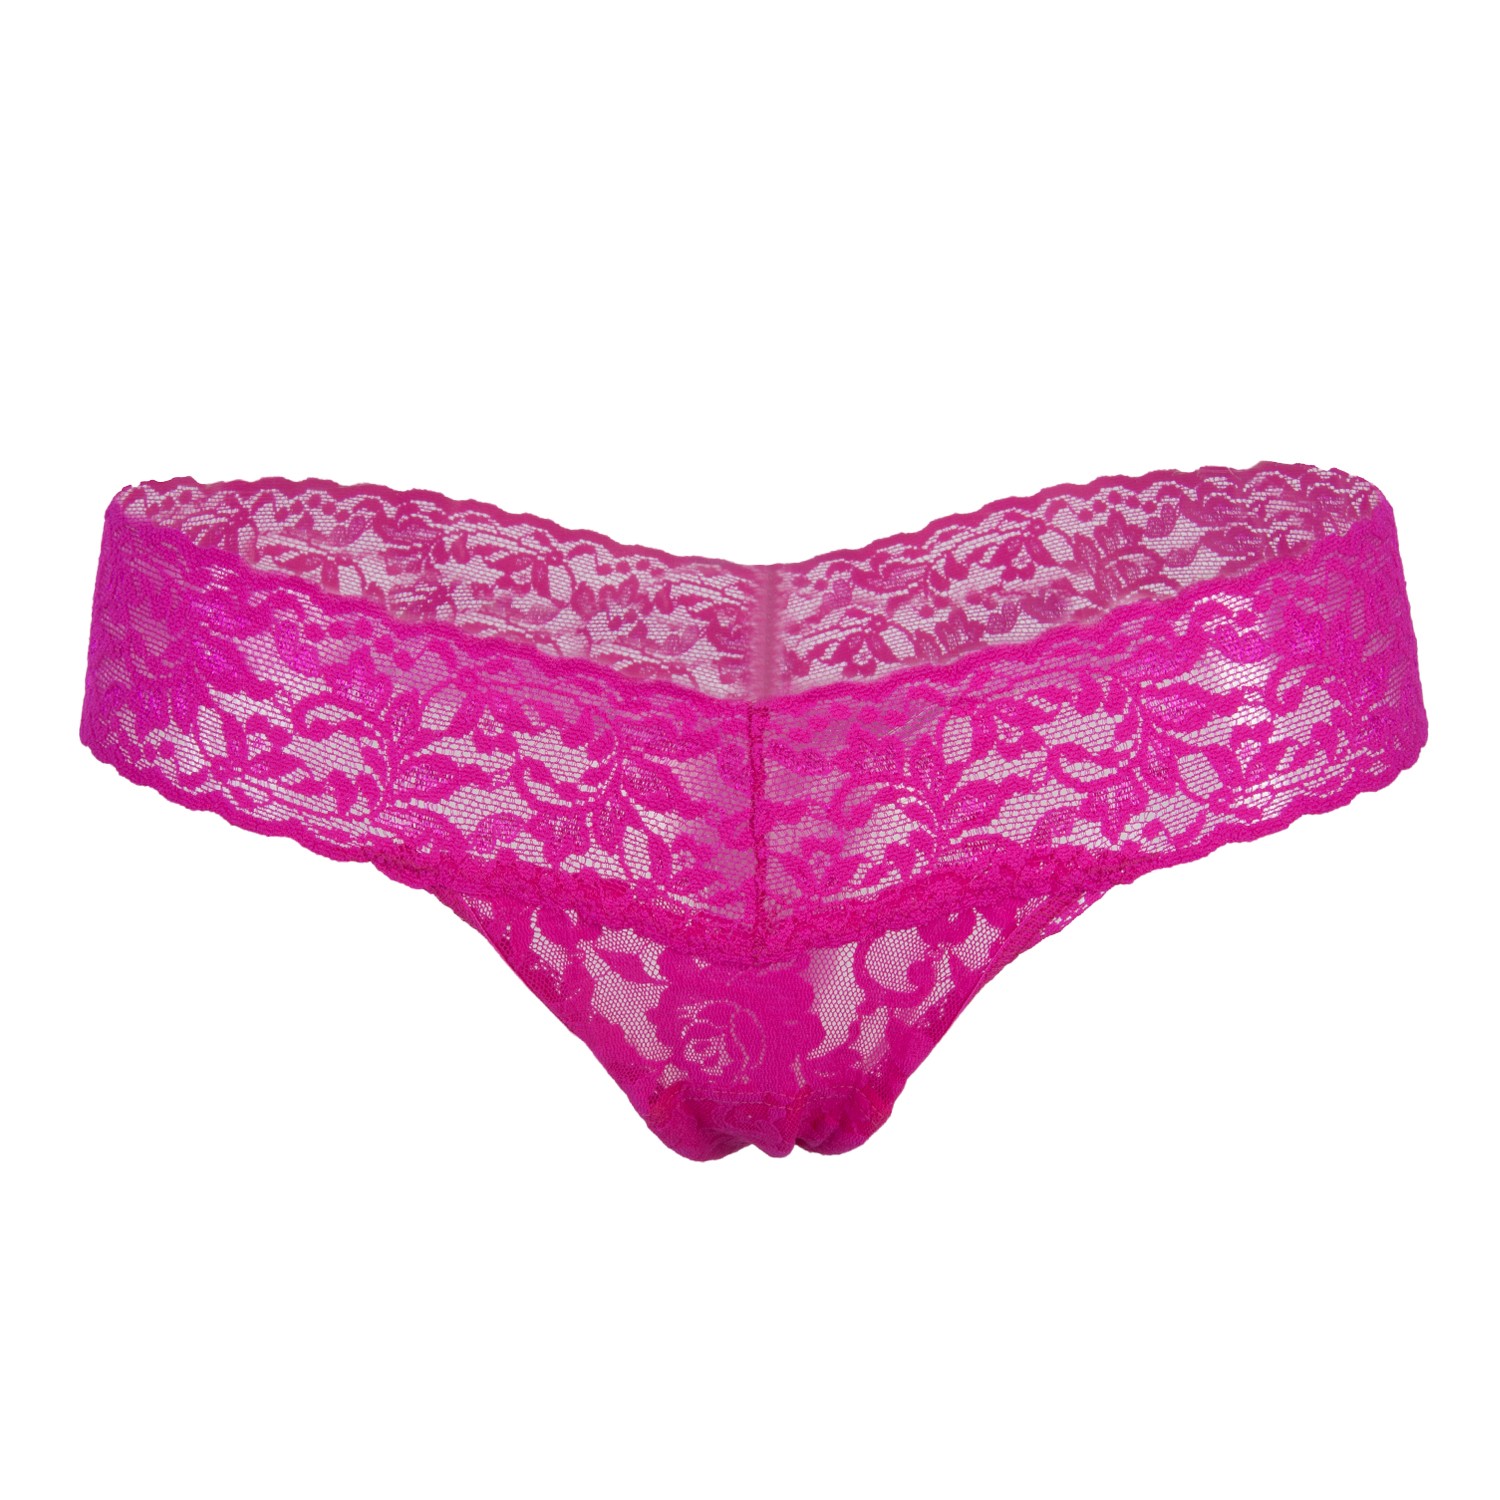 Hanky Panky Thong Low Rise TPINK